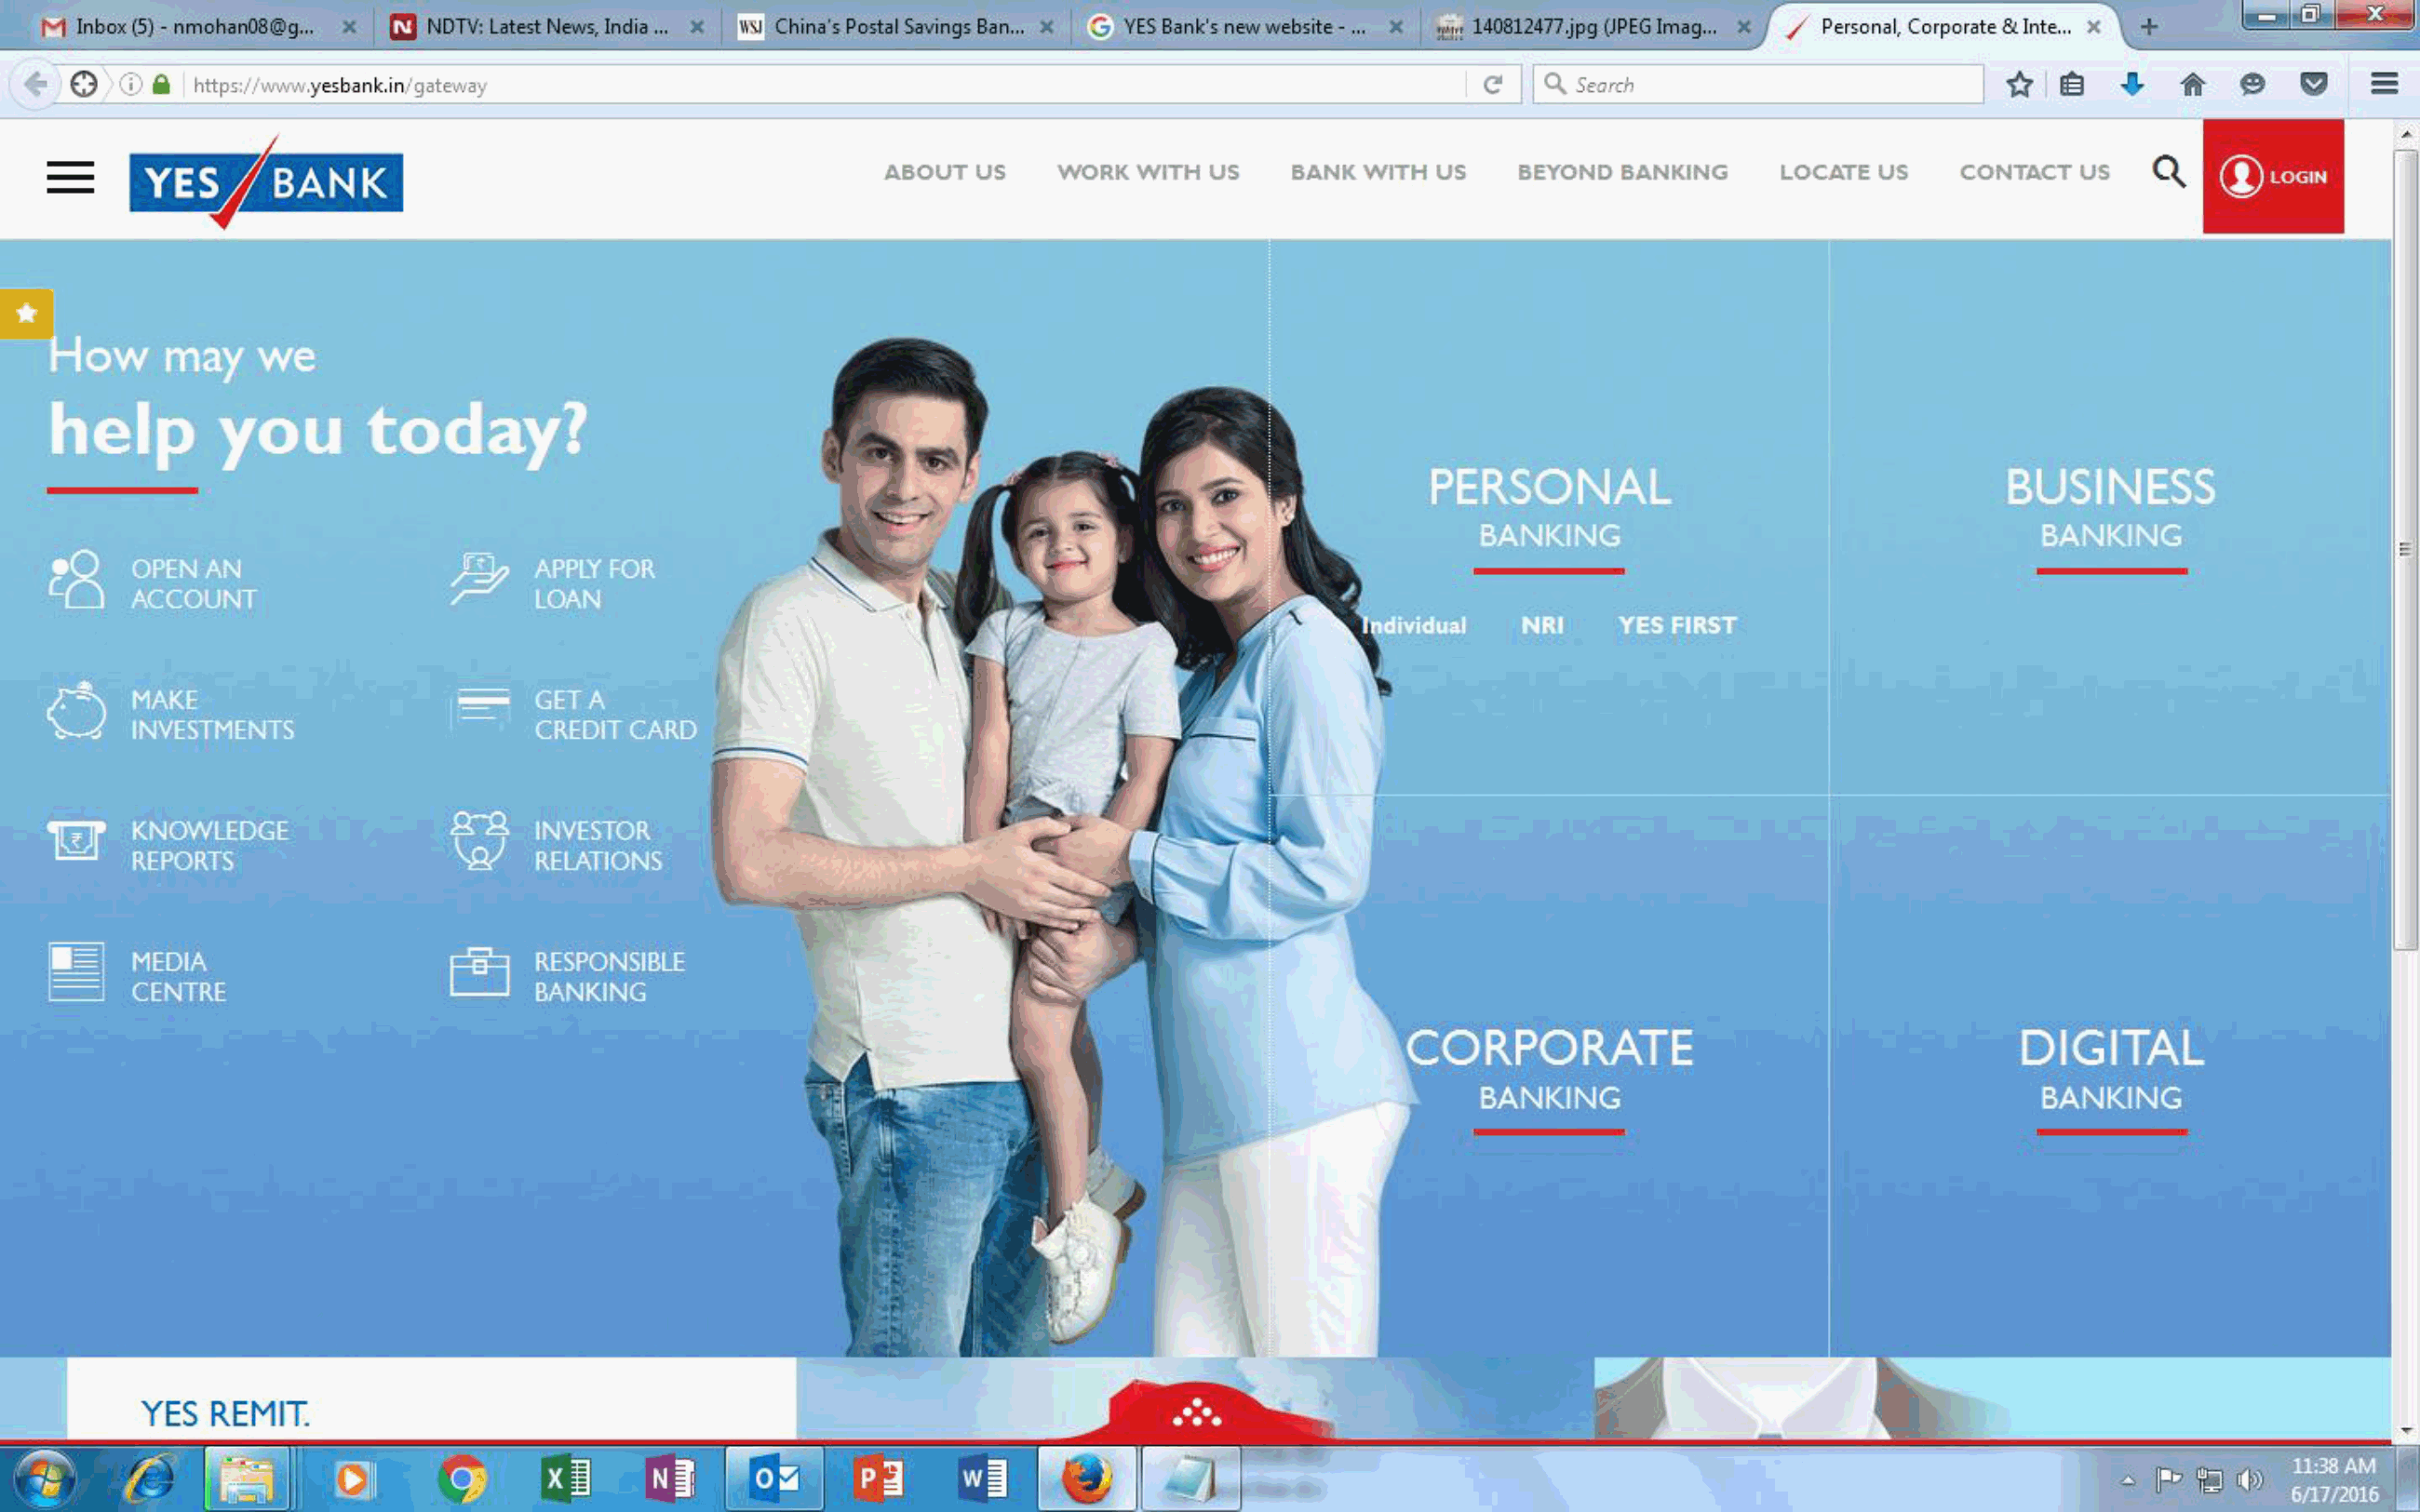 T me aged bank. Yes Bank. Banking website. Настя Corporate Banking. Today! Person.